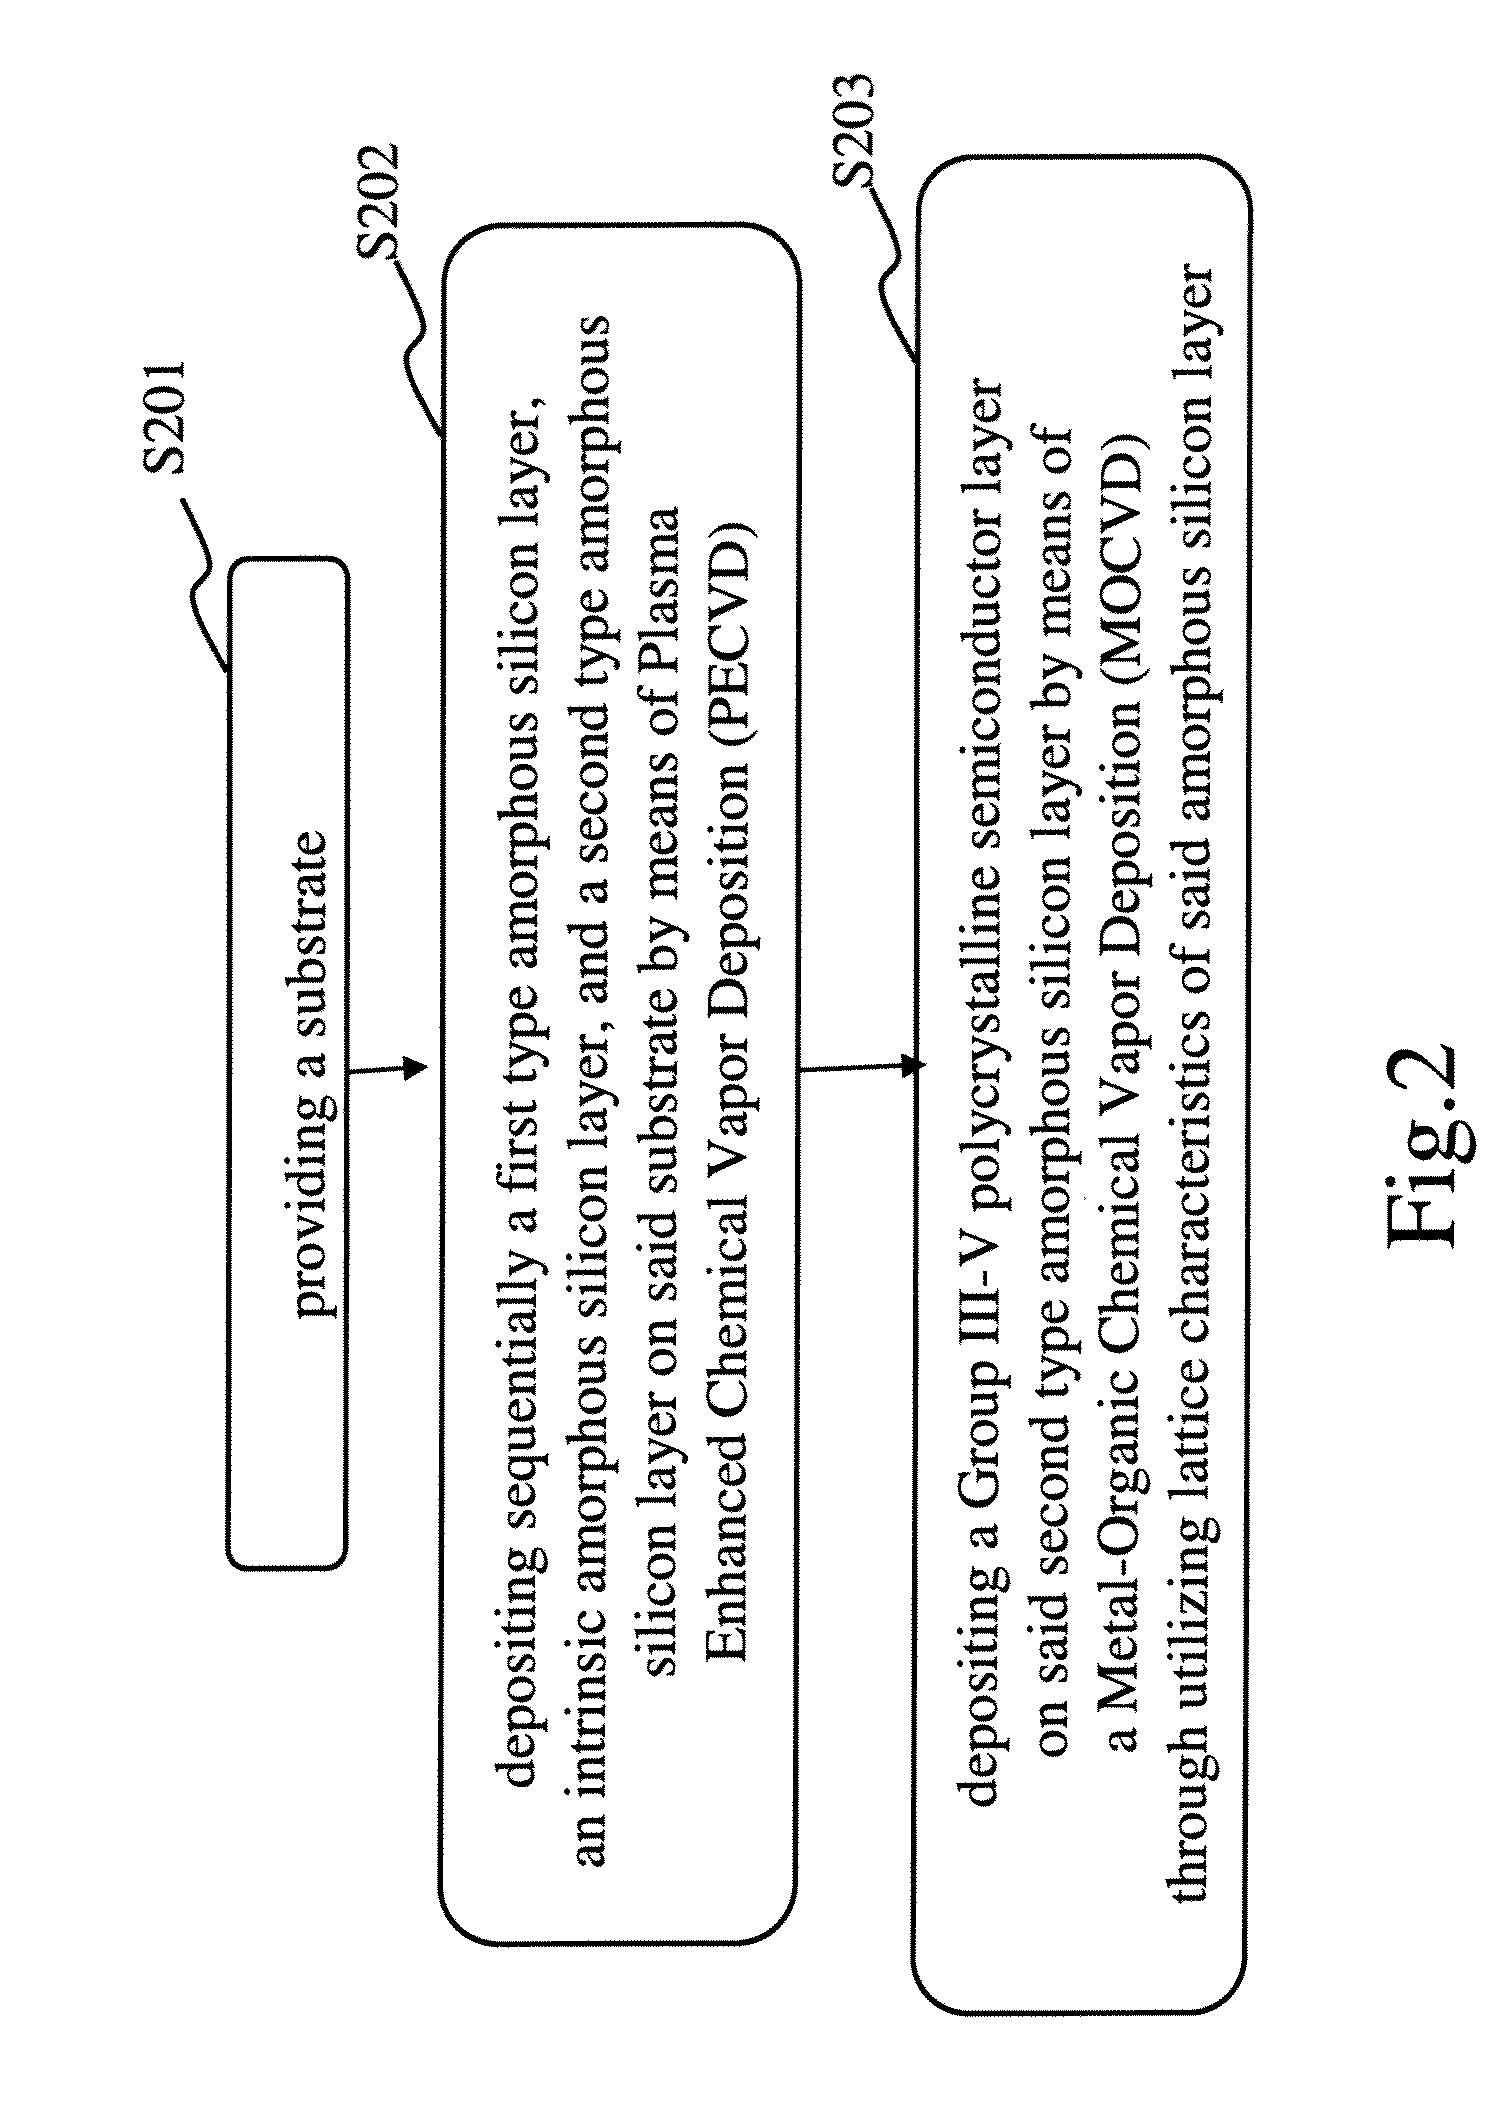 Group iii-v solar cell and method of manufacturing the same